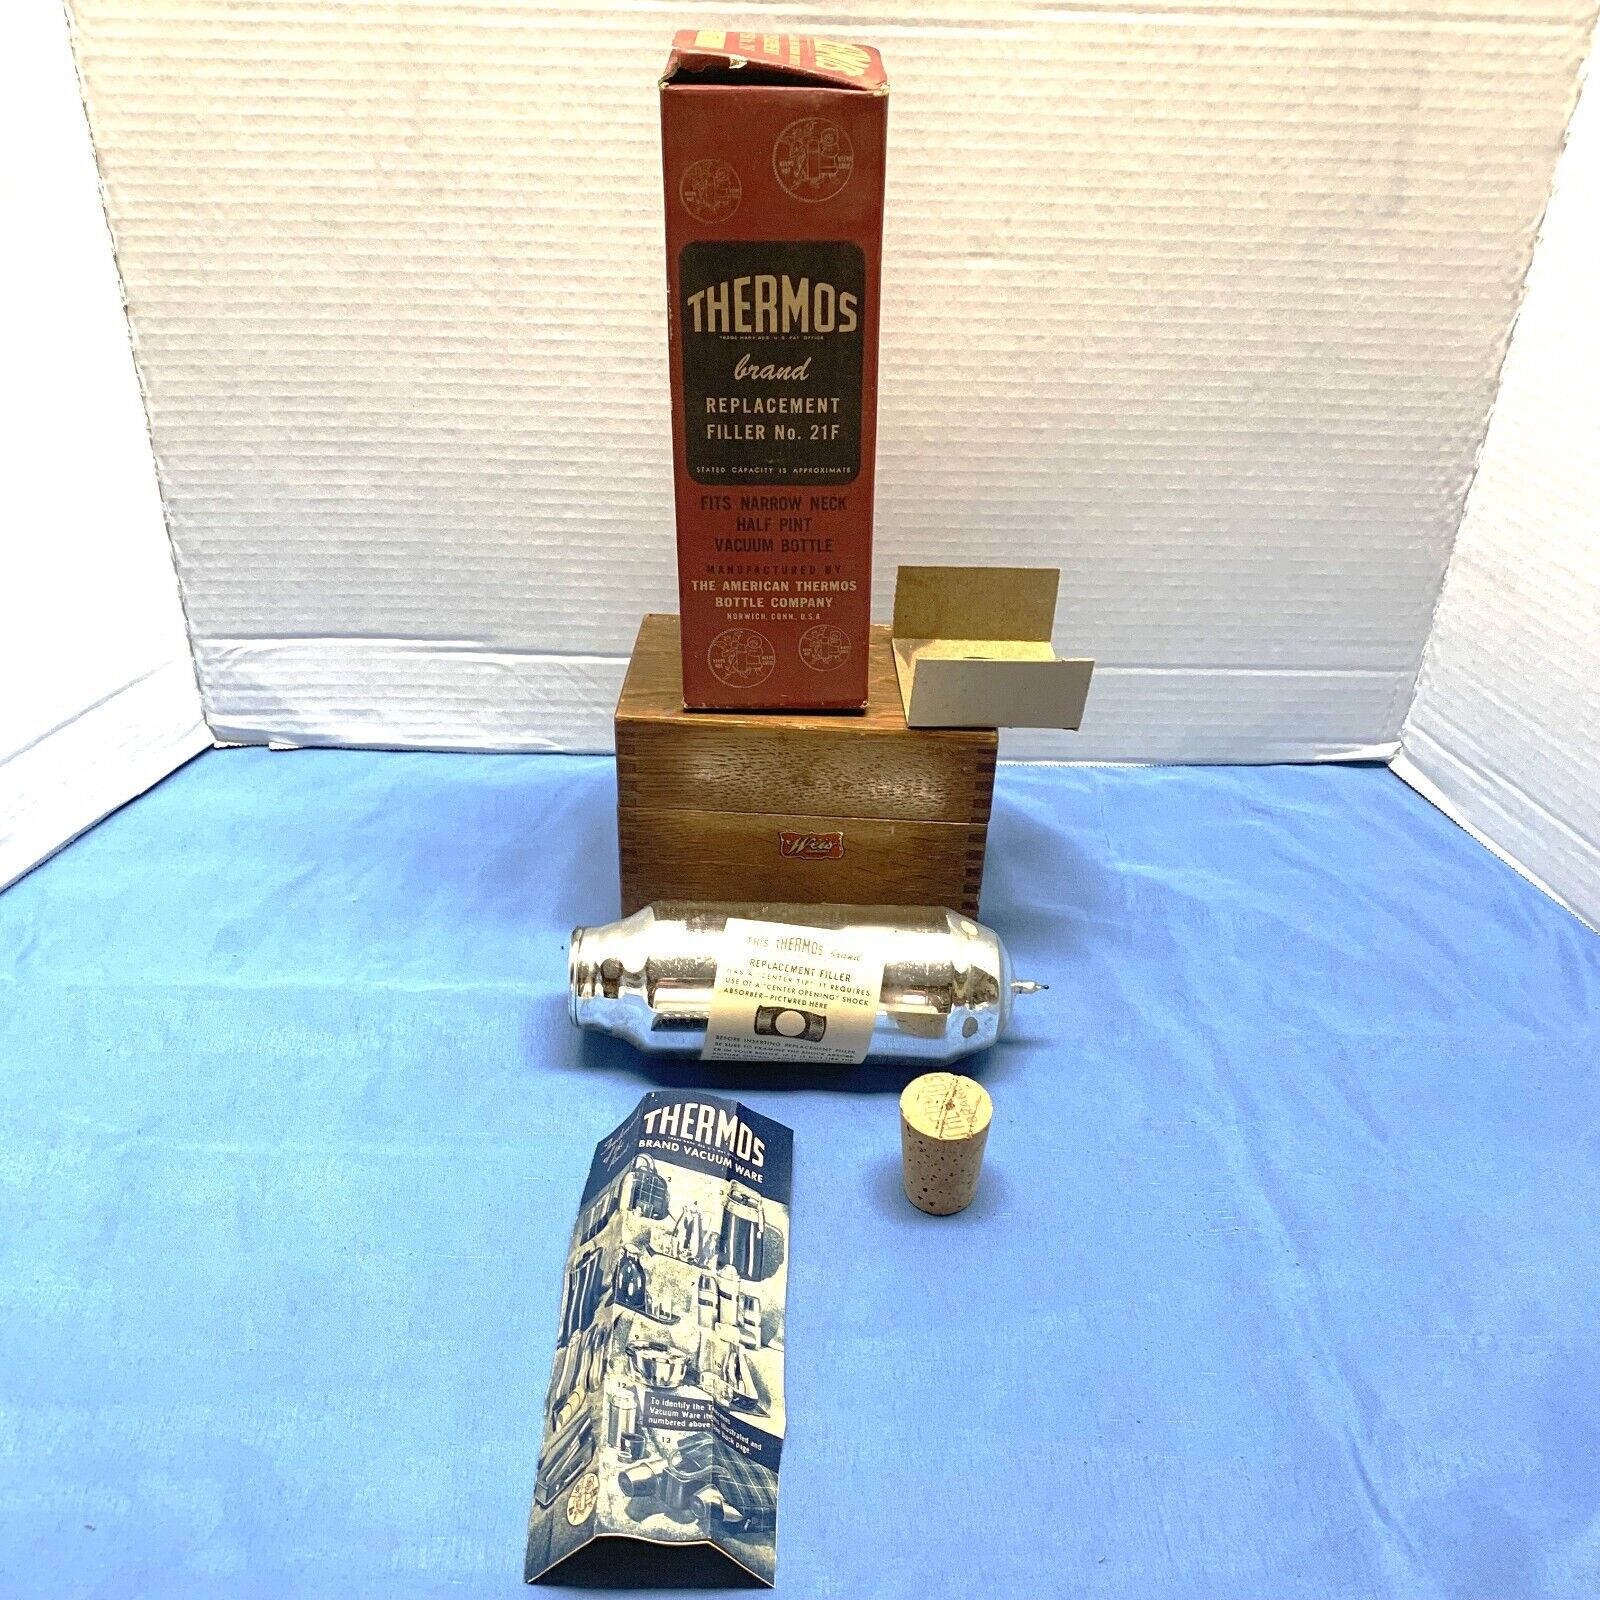 Vintage 1950S THERMOS Brand Replacement Filler No. 21F